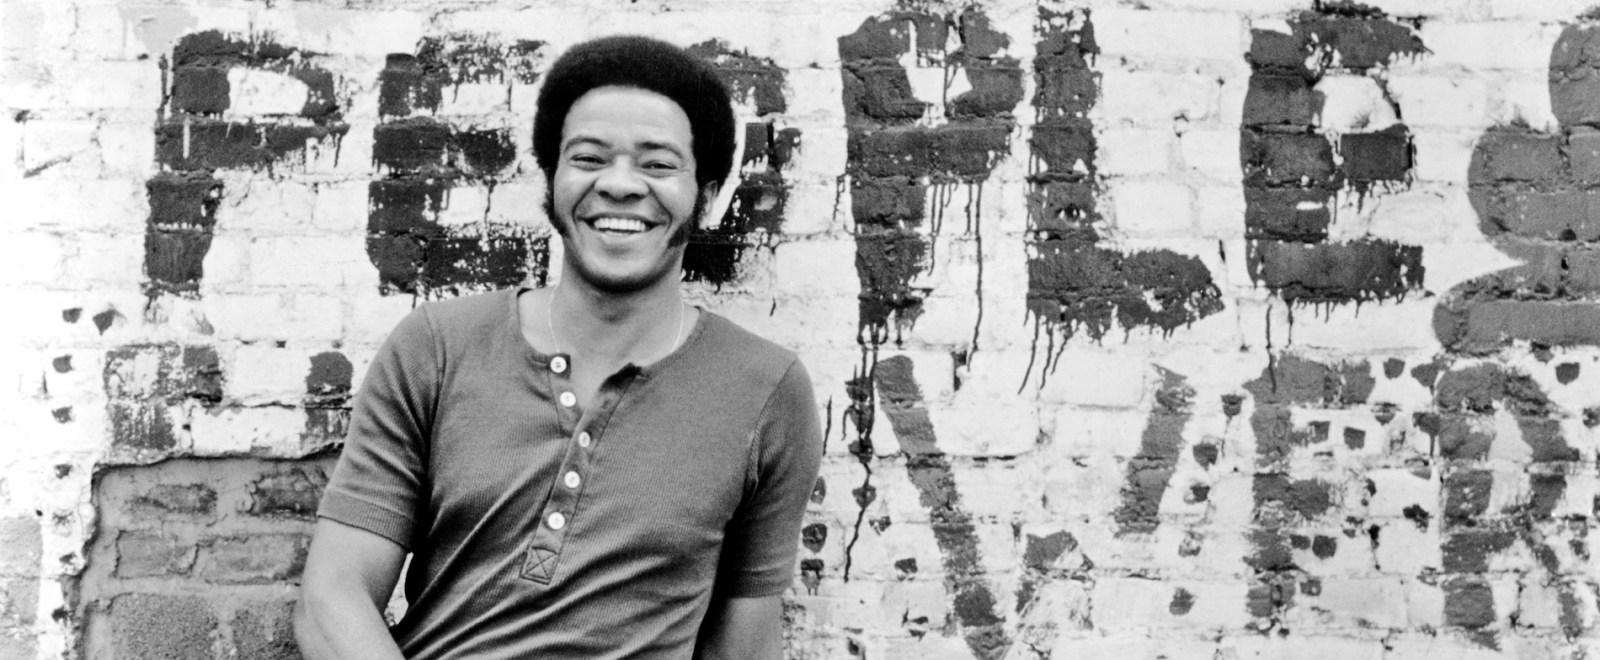 bill-withers-getty-full.jpg